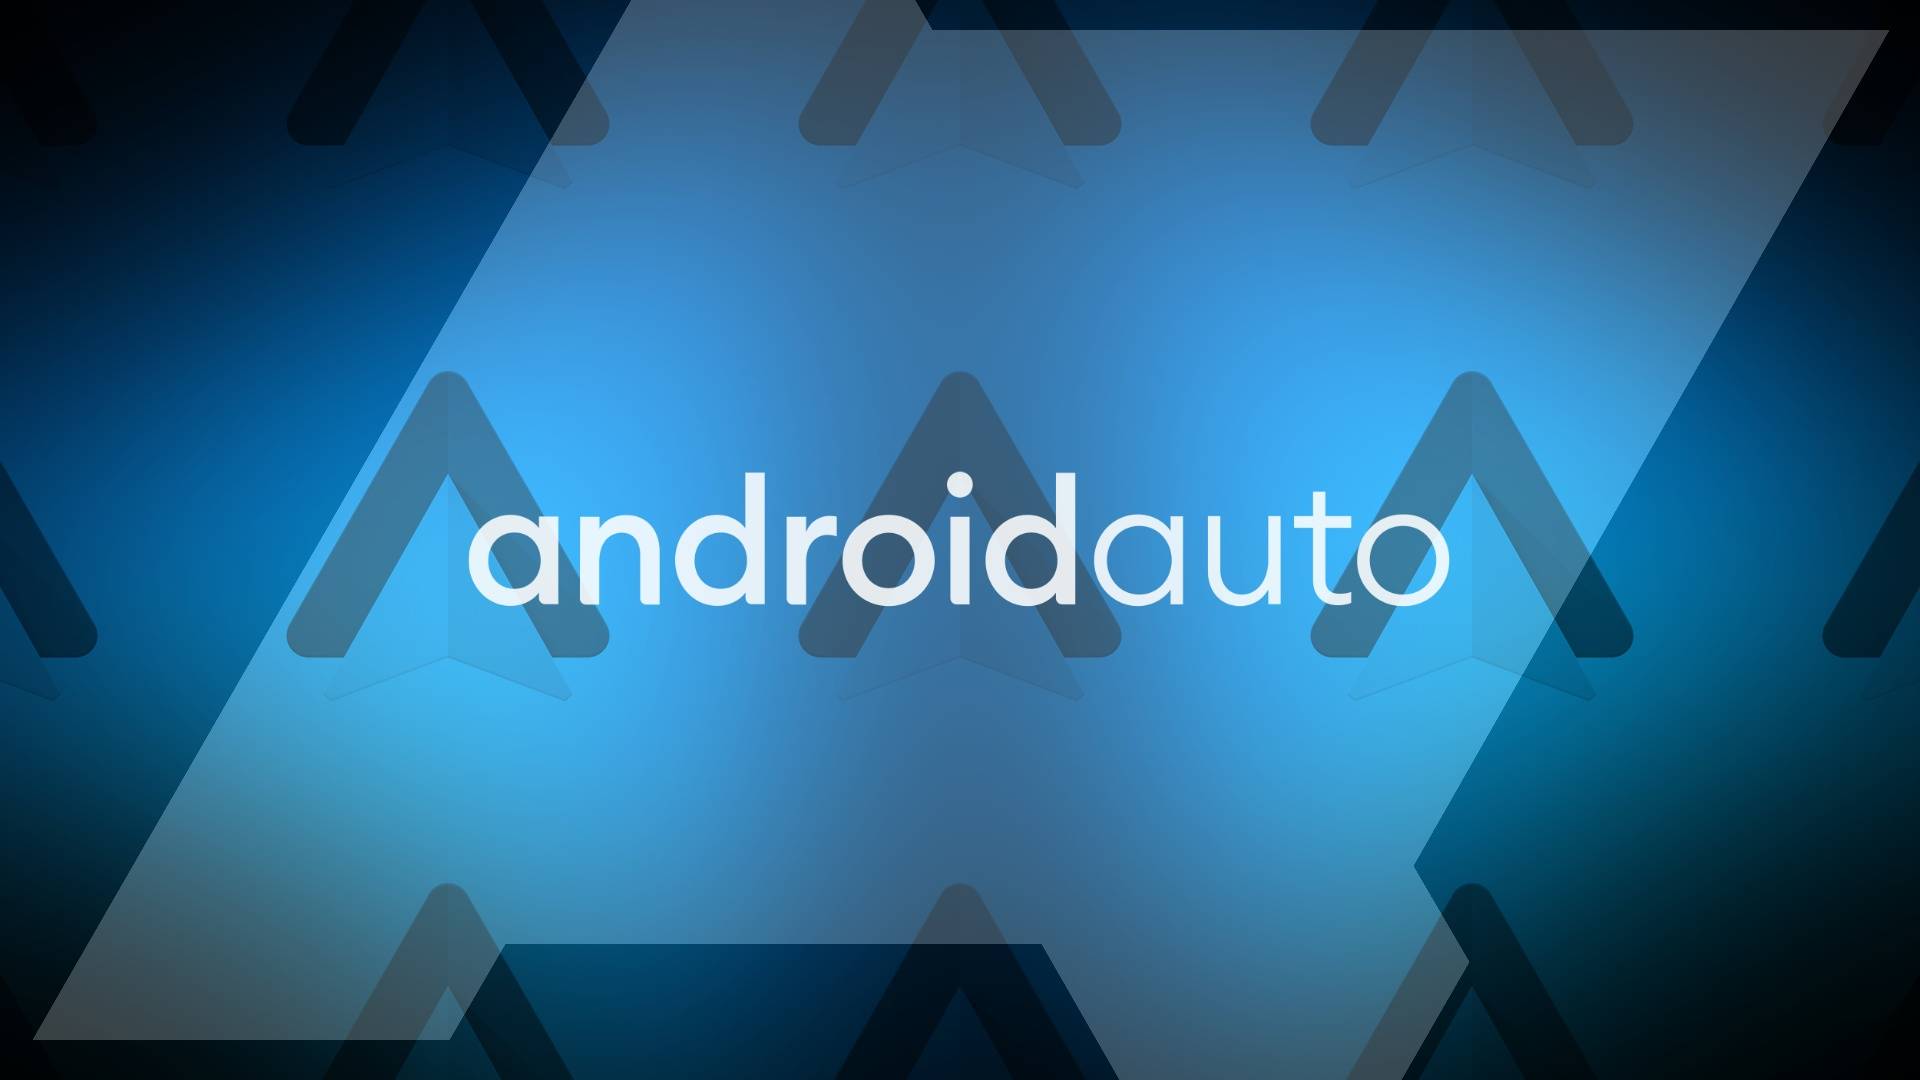 Android Auto might bring back the light theme